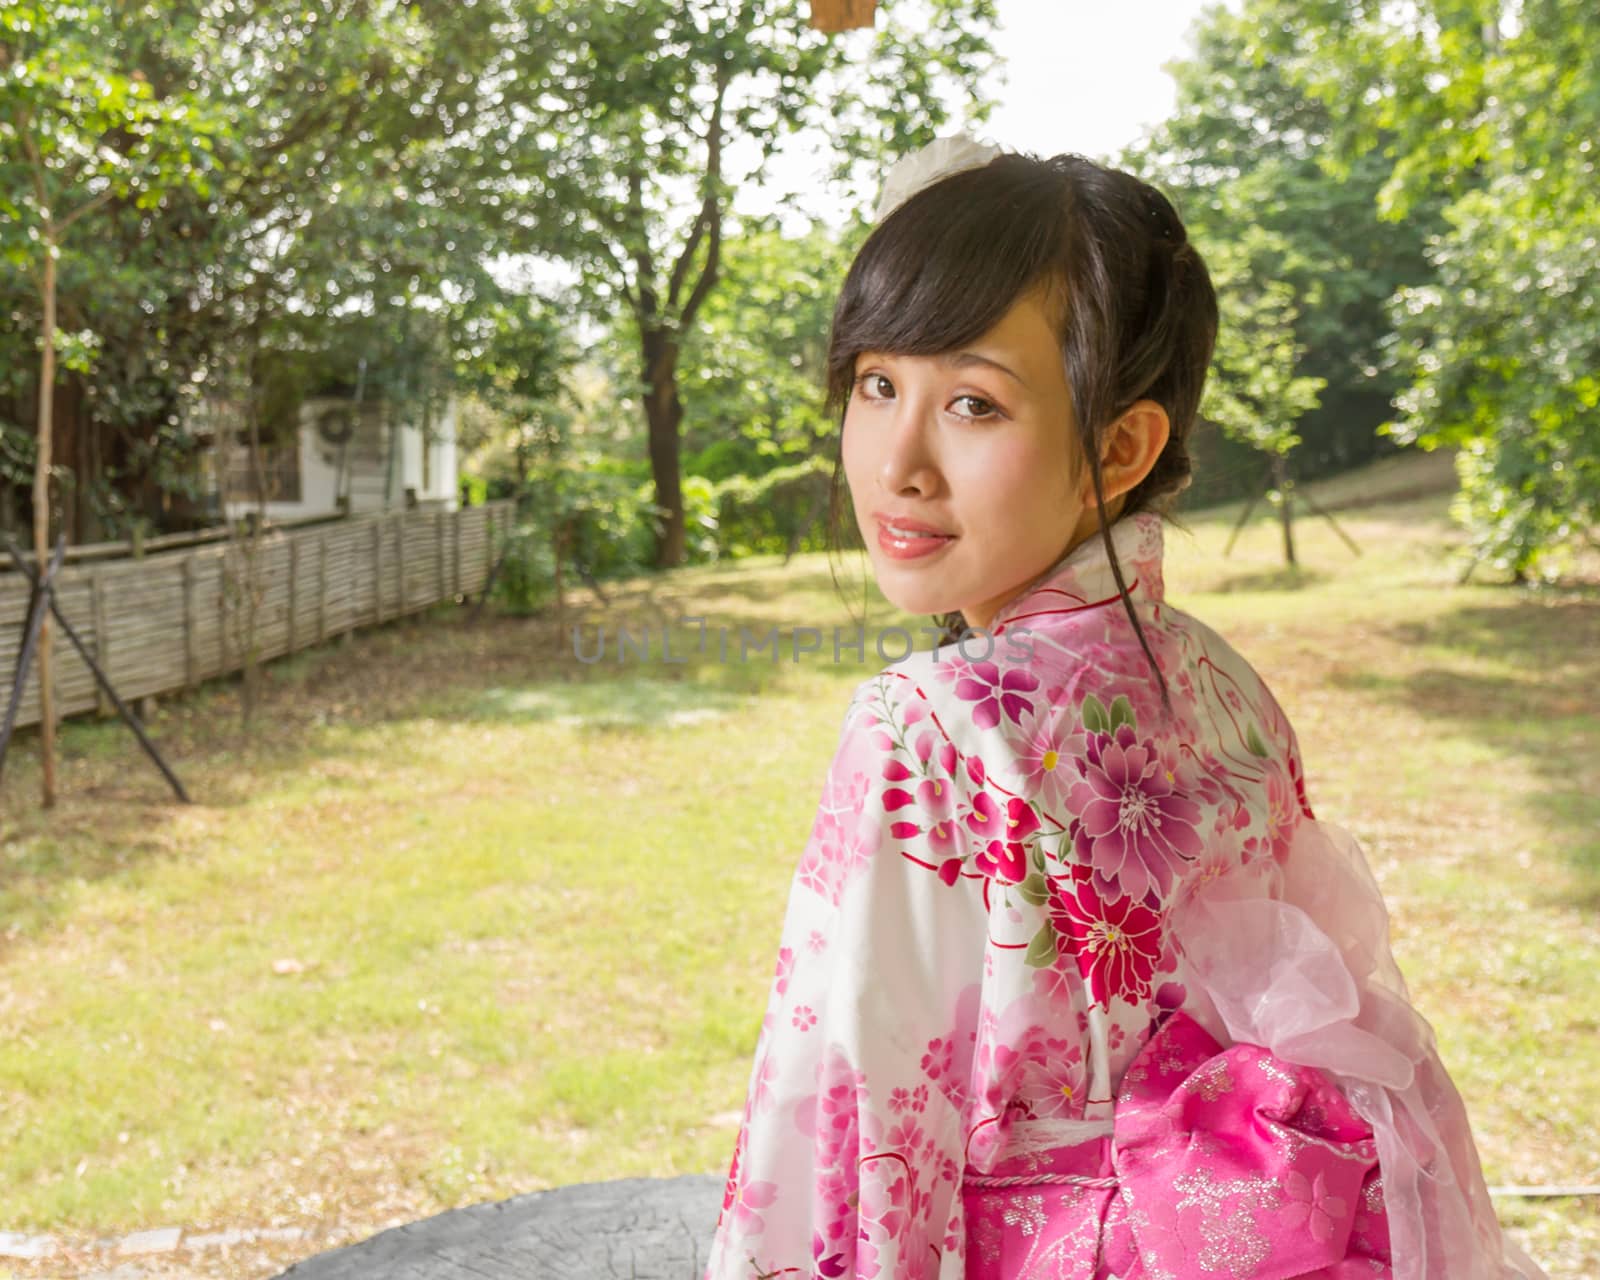 Asian woman in a kimono in a Japanese style garden looking back at camera